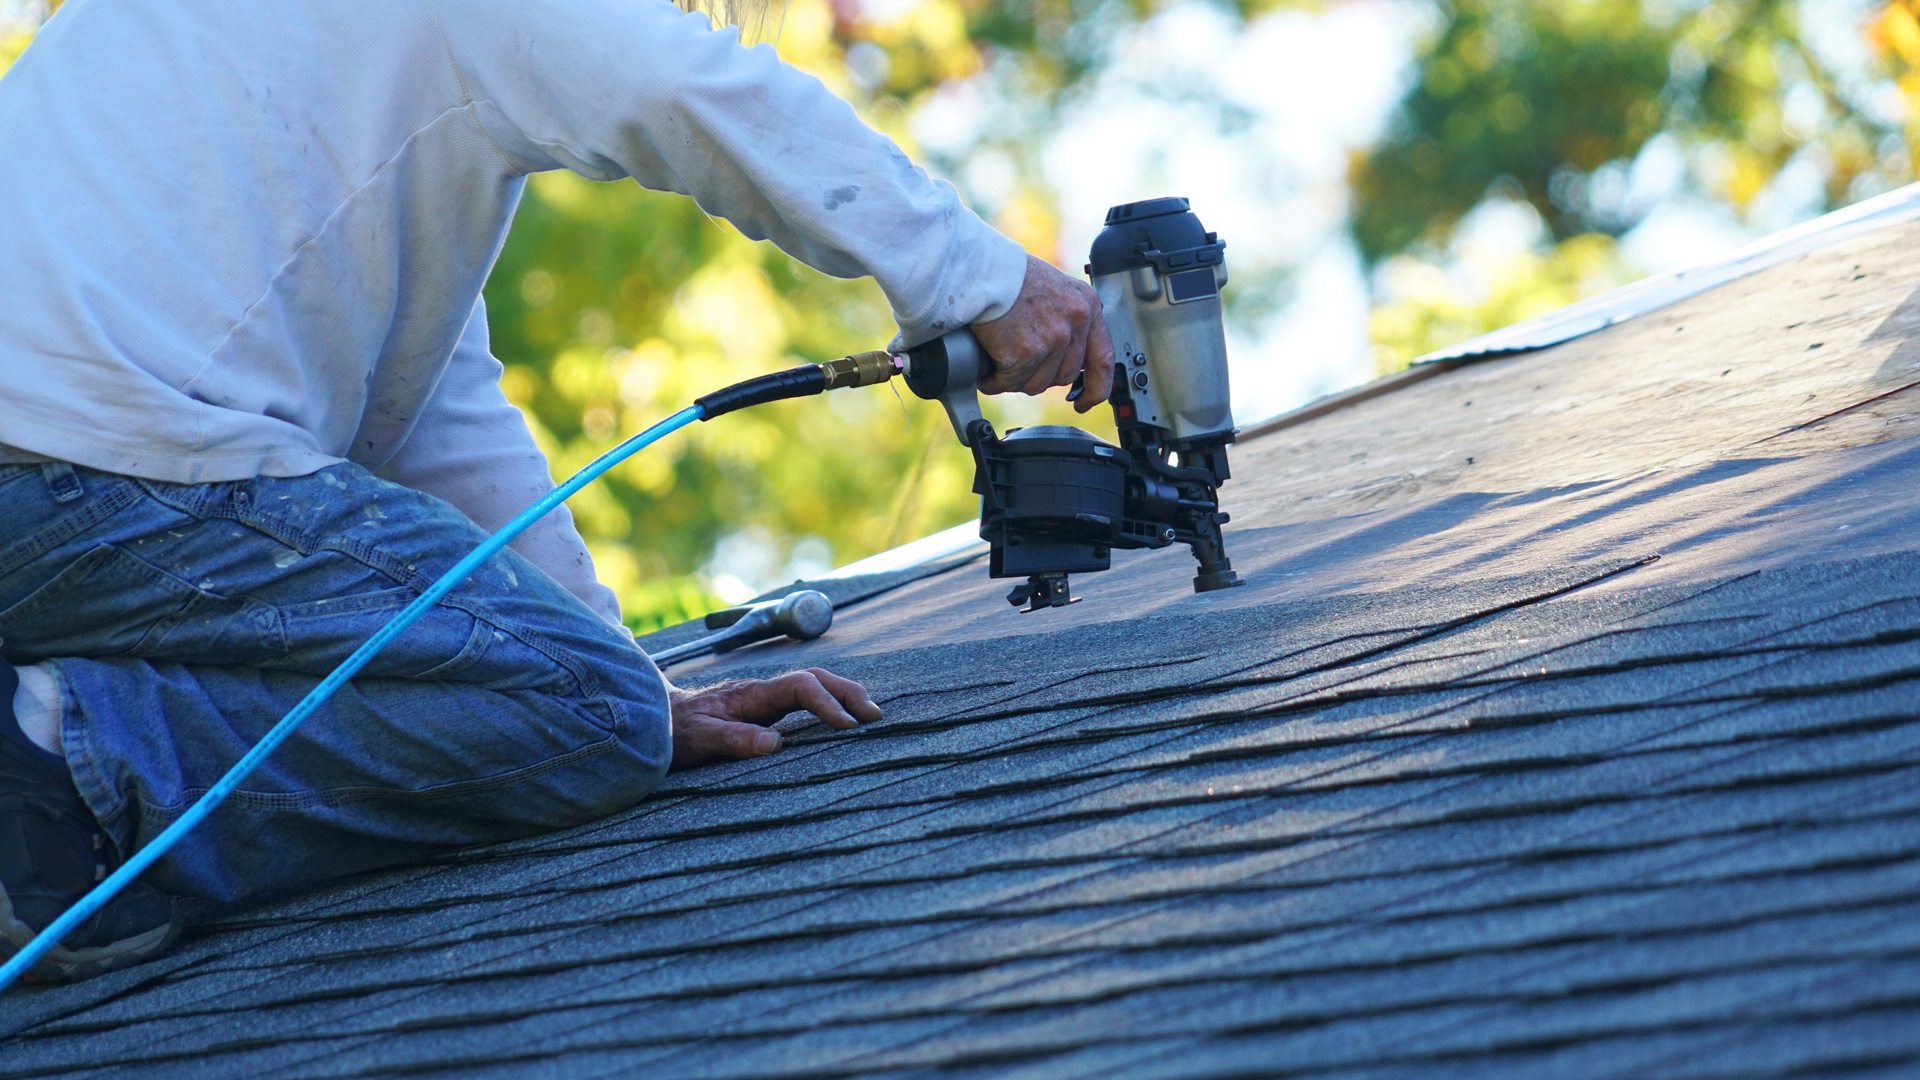 Fixes for Long Island Leaky Roof